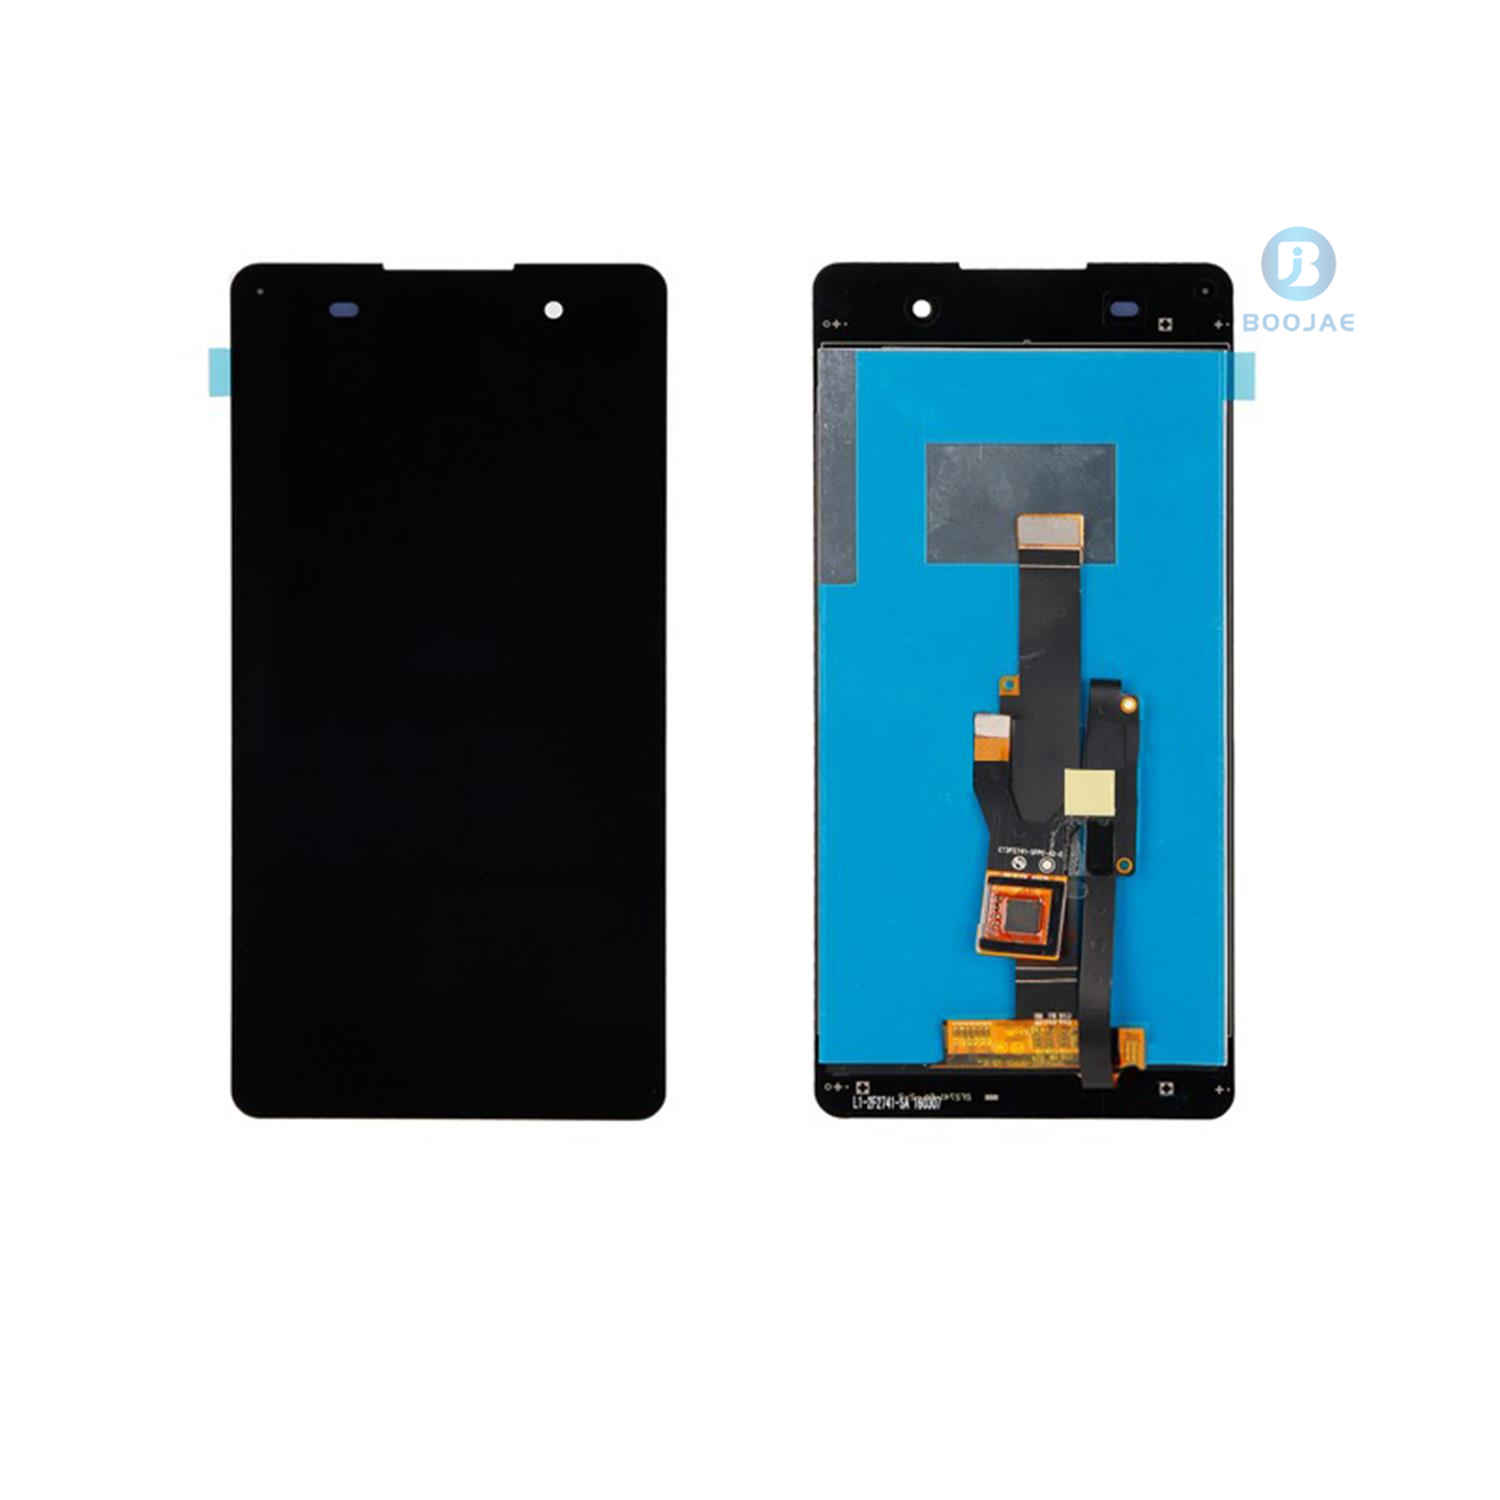 Sony Xperia E5 Lcd Screen Display, Lcd Assembly Replacement